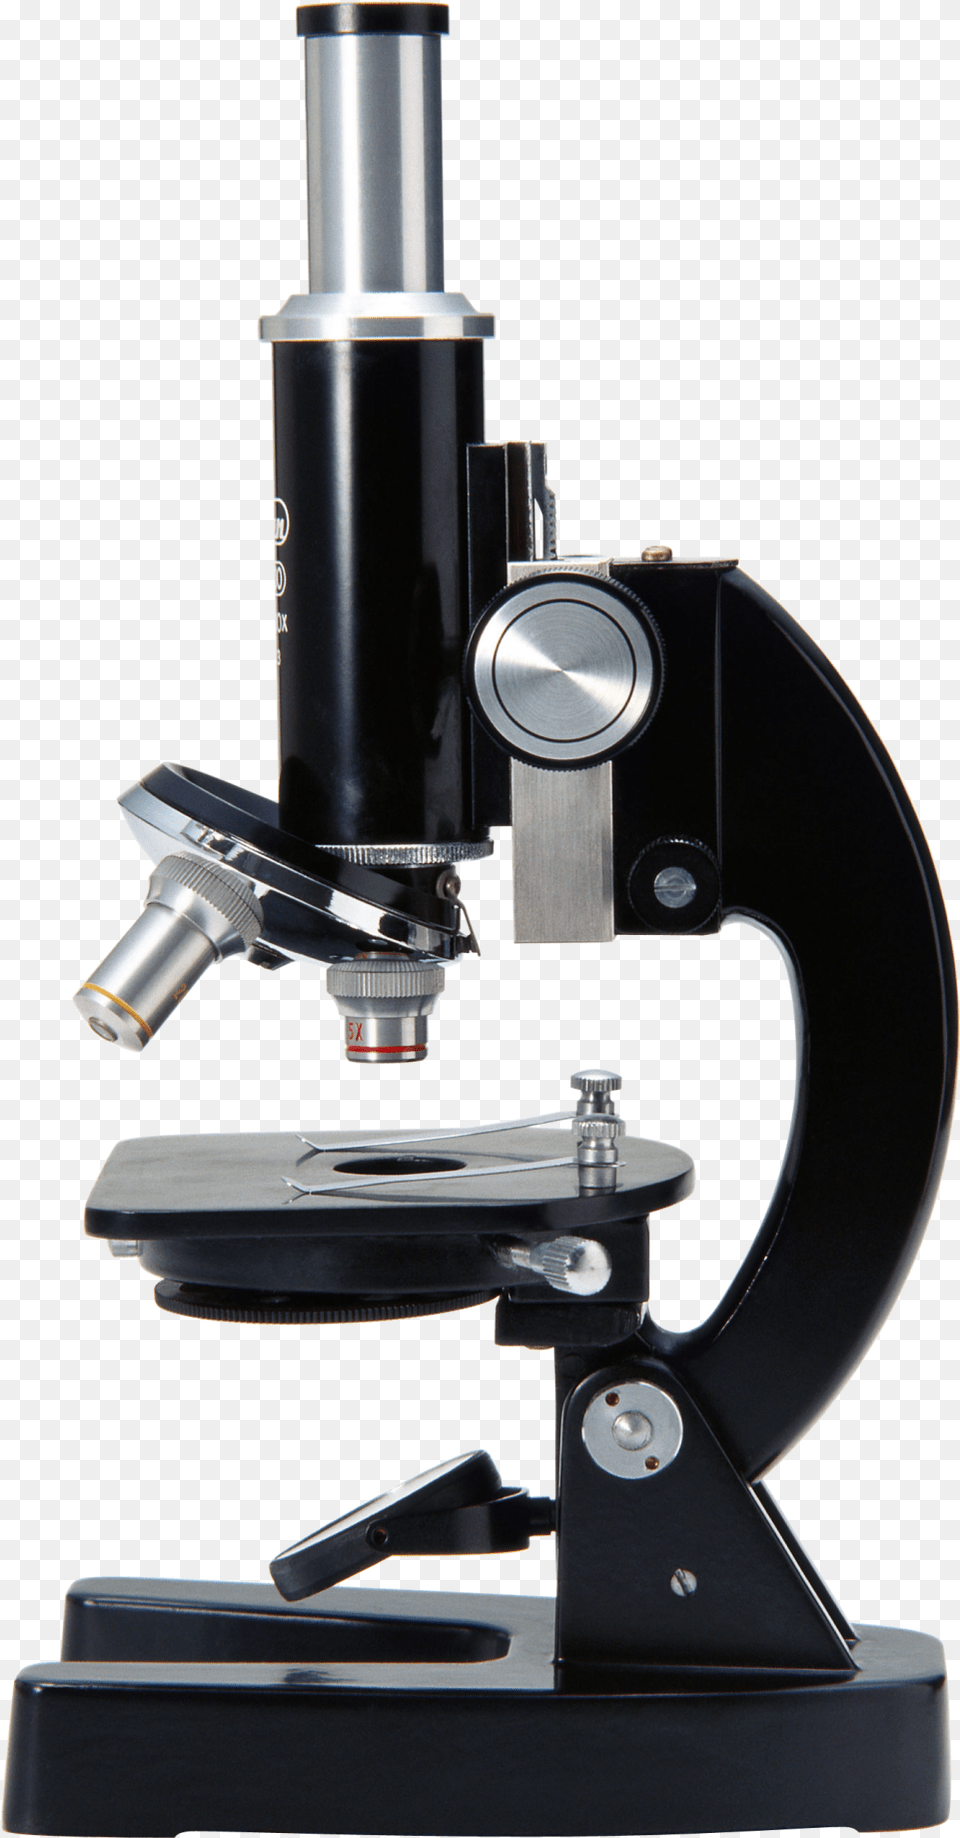 Microscope Image Transparent Background Microscope Free Png